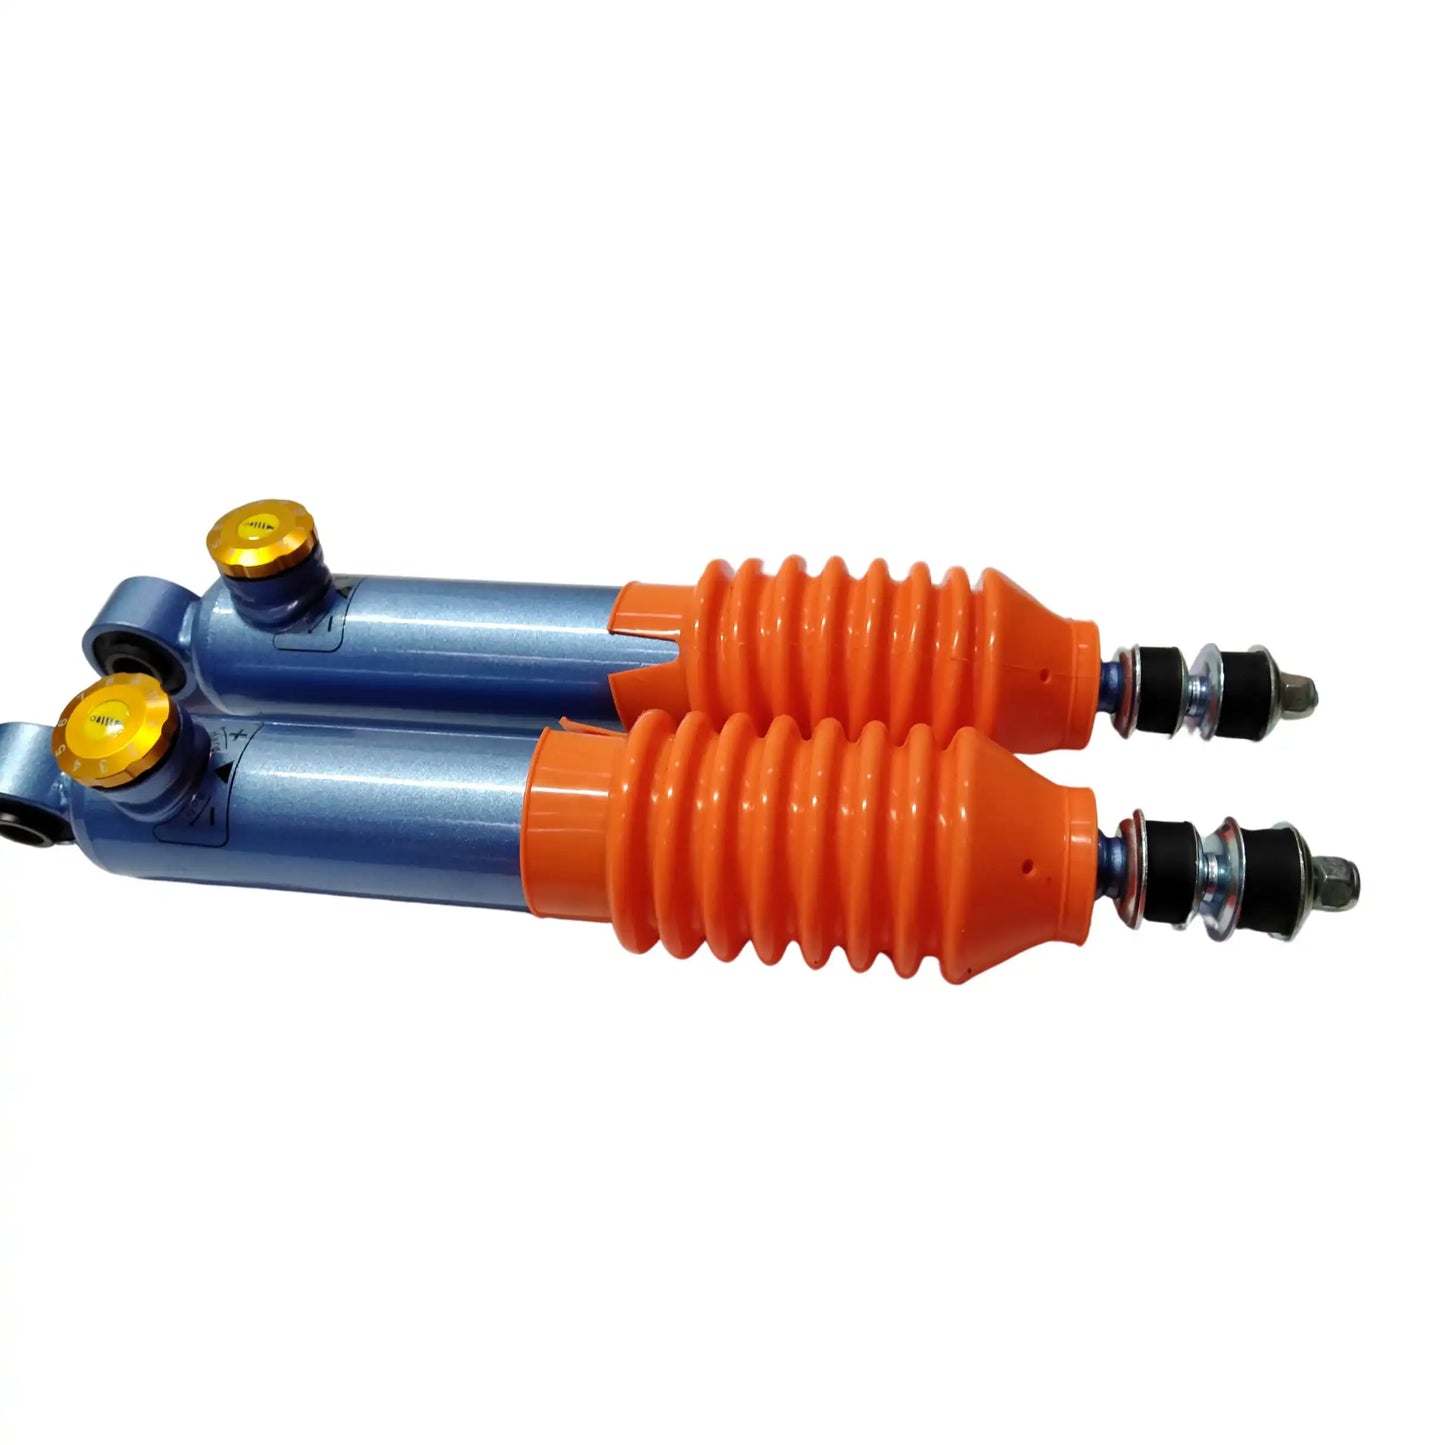 Toyota Hilux LN107 2.2" Twin Tube Foam Cell Shocks with 8-Stage Compression Adjustment